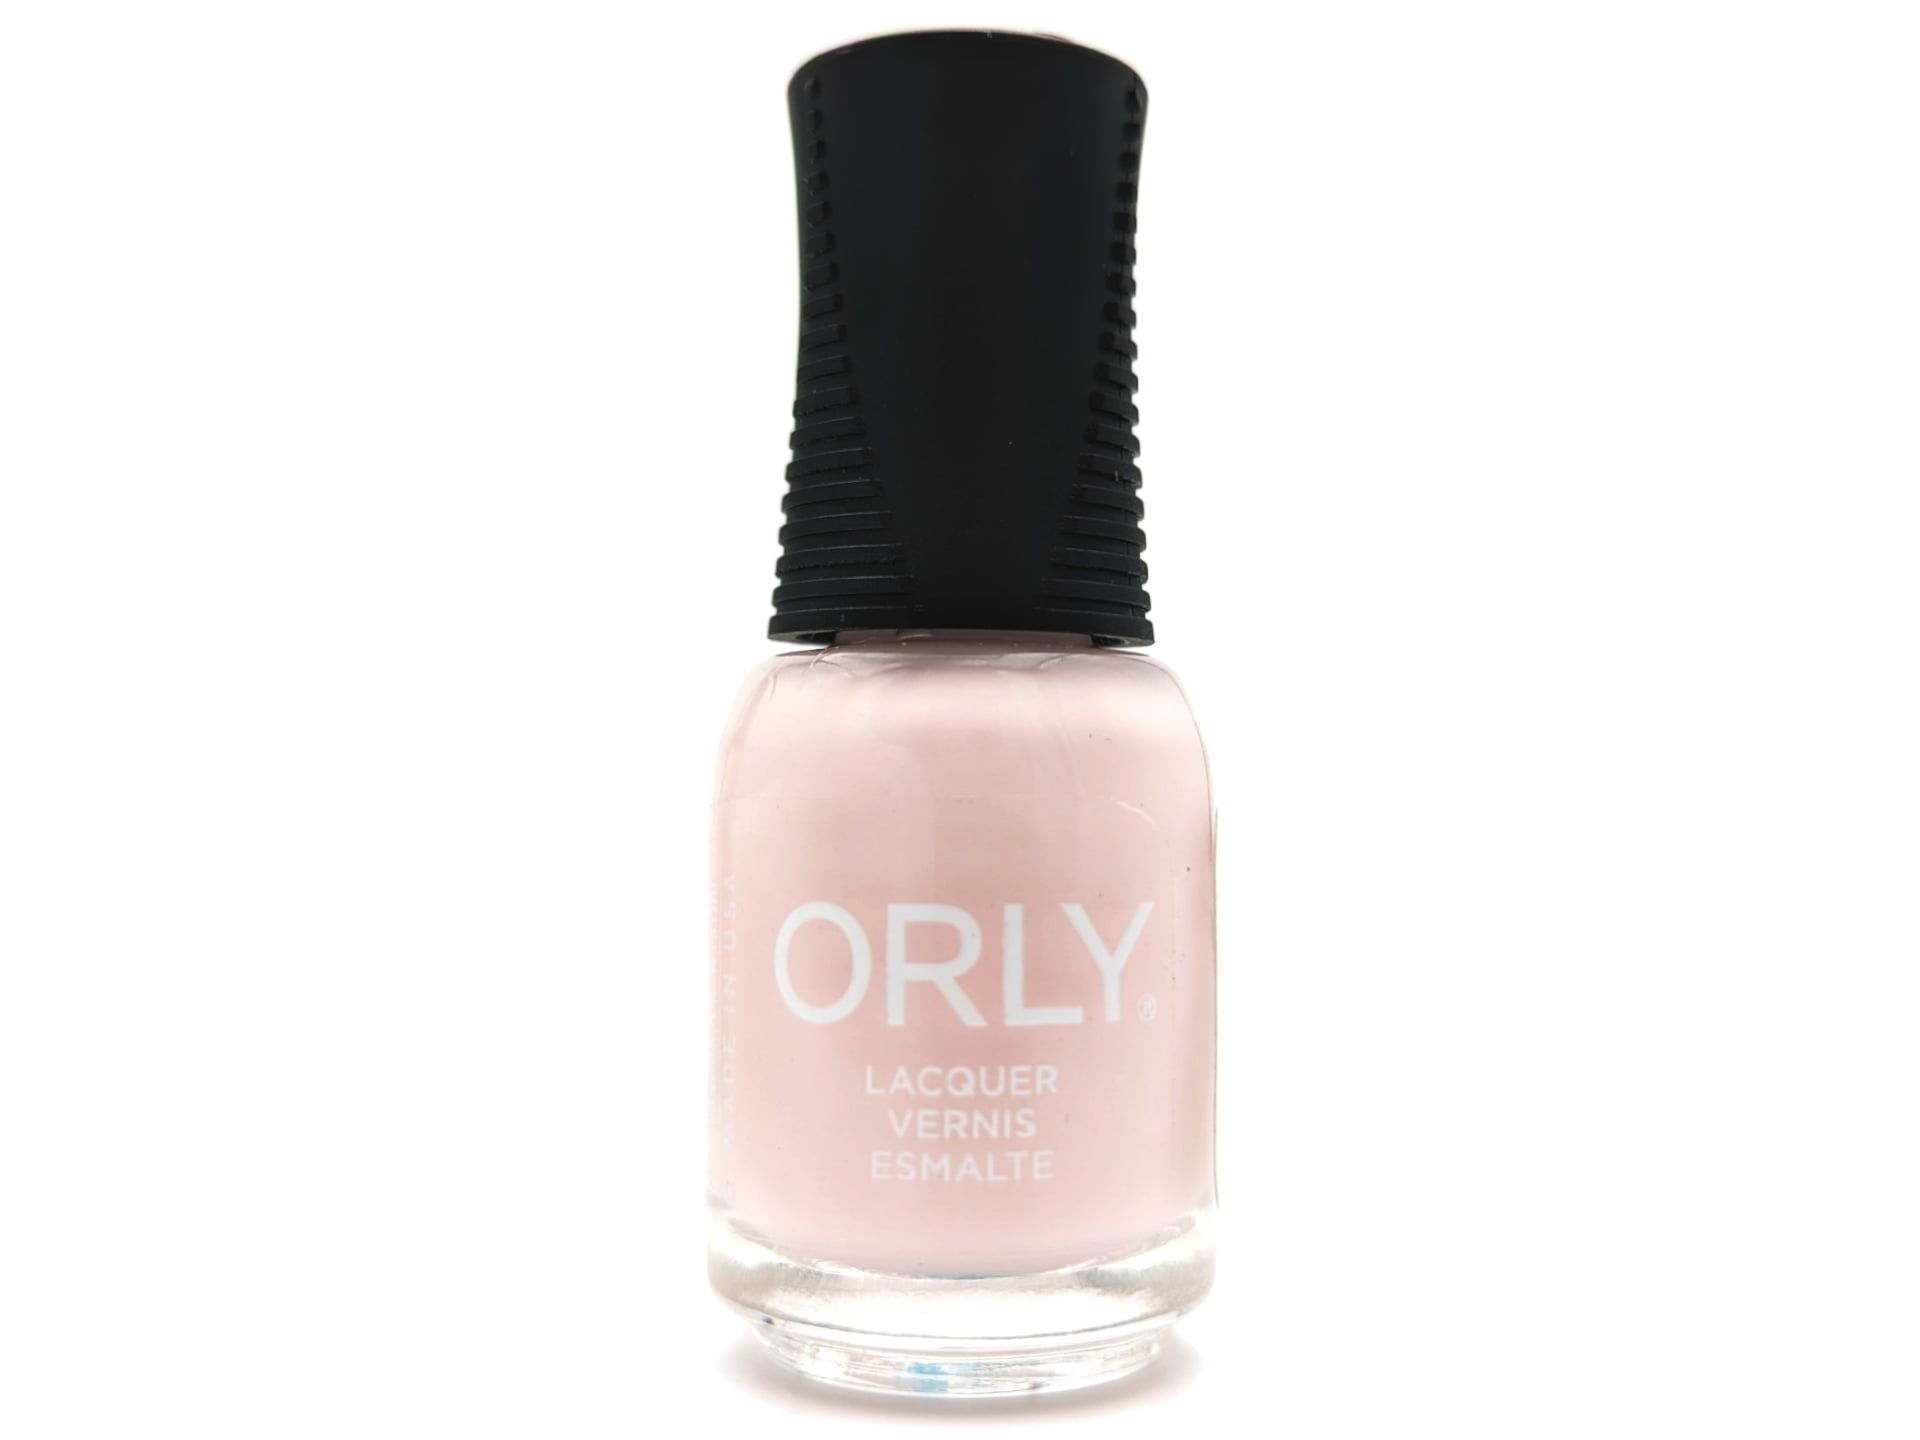 Orly Nagellack (Kiss The Bride)